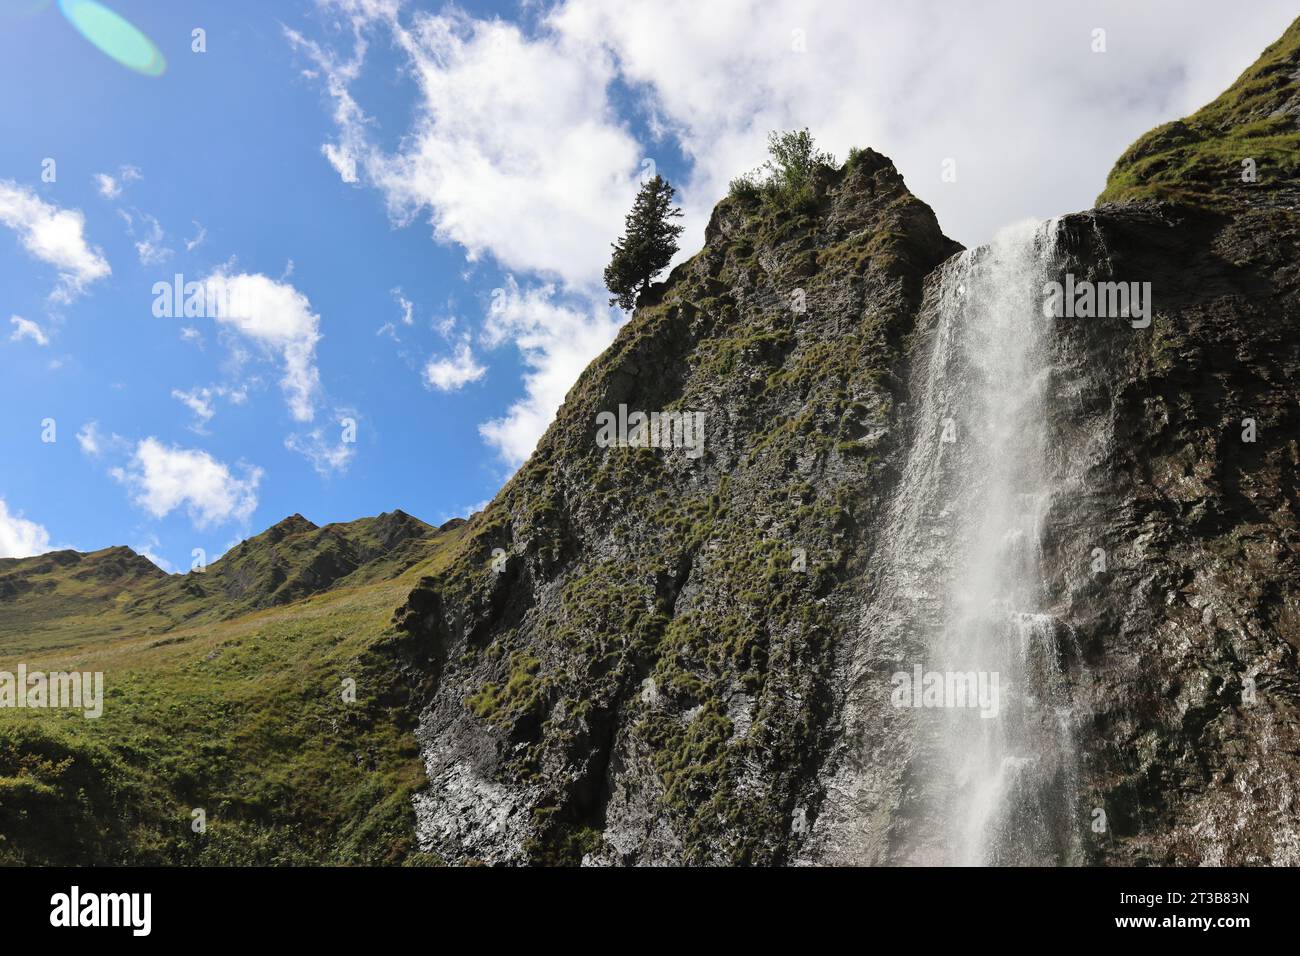 beautiful view of the Schleier waterfall in the mountains near Hintertux, Austria Stock Photo